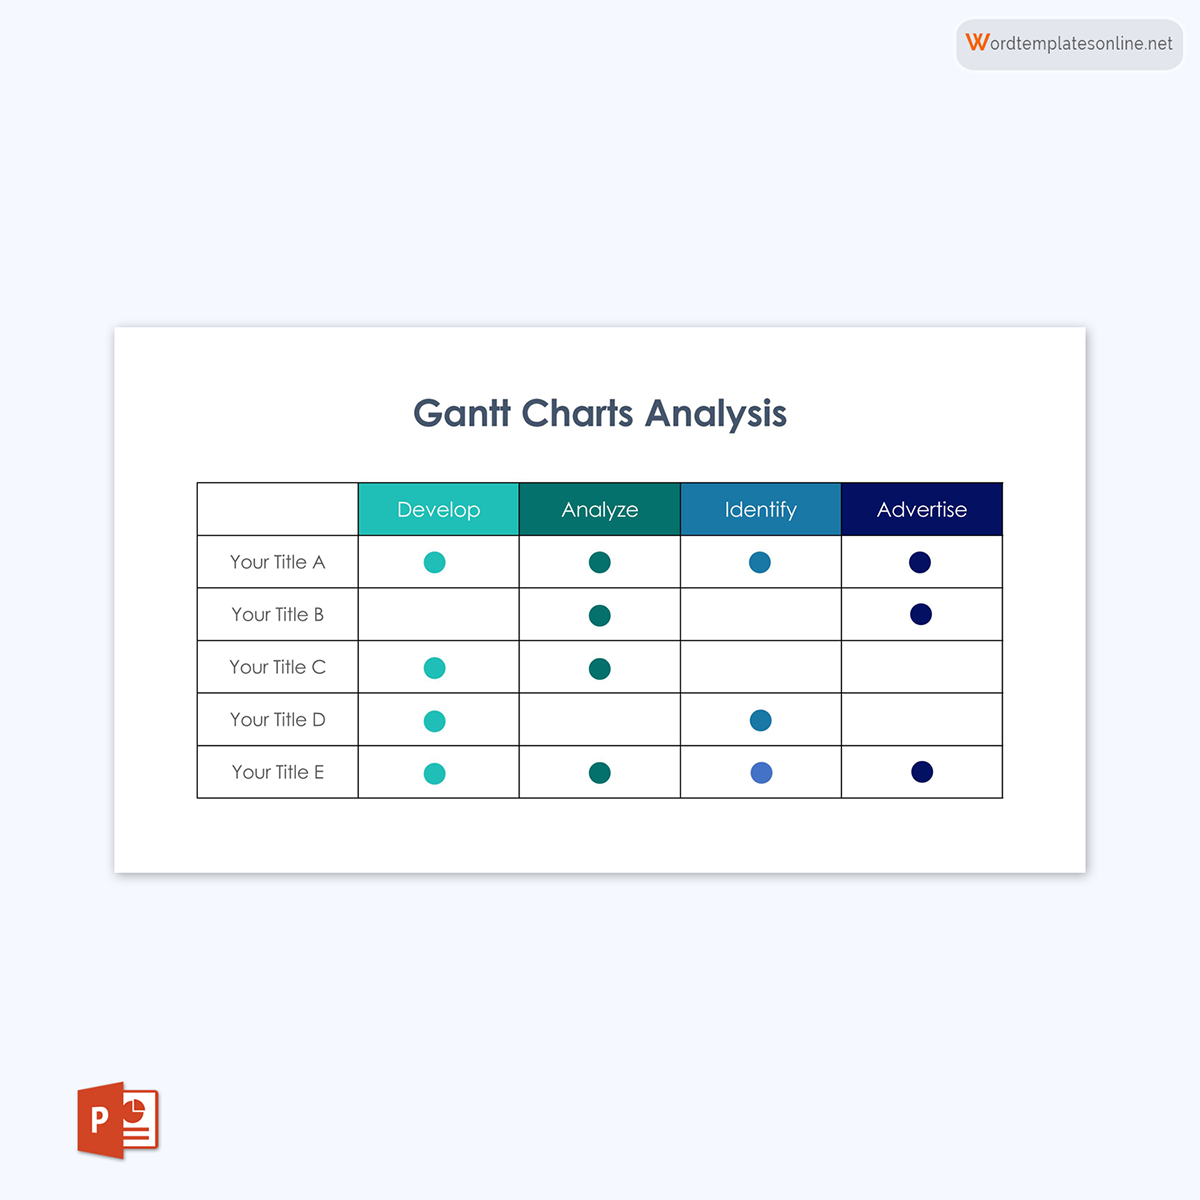 Professional Editable Title Based Gantt Chart Analysis Template 03 as PowerPoint Slides